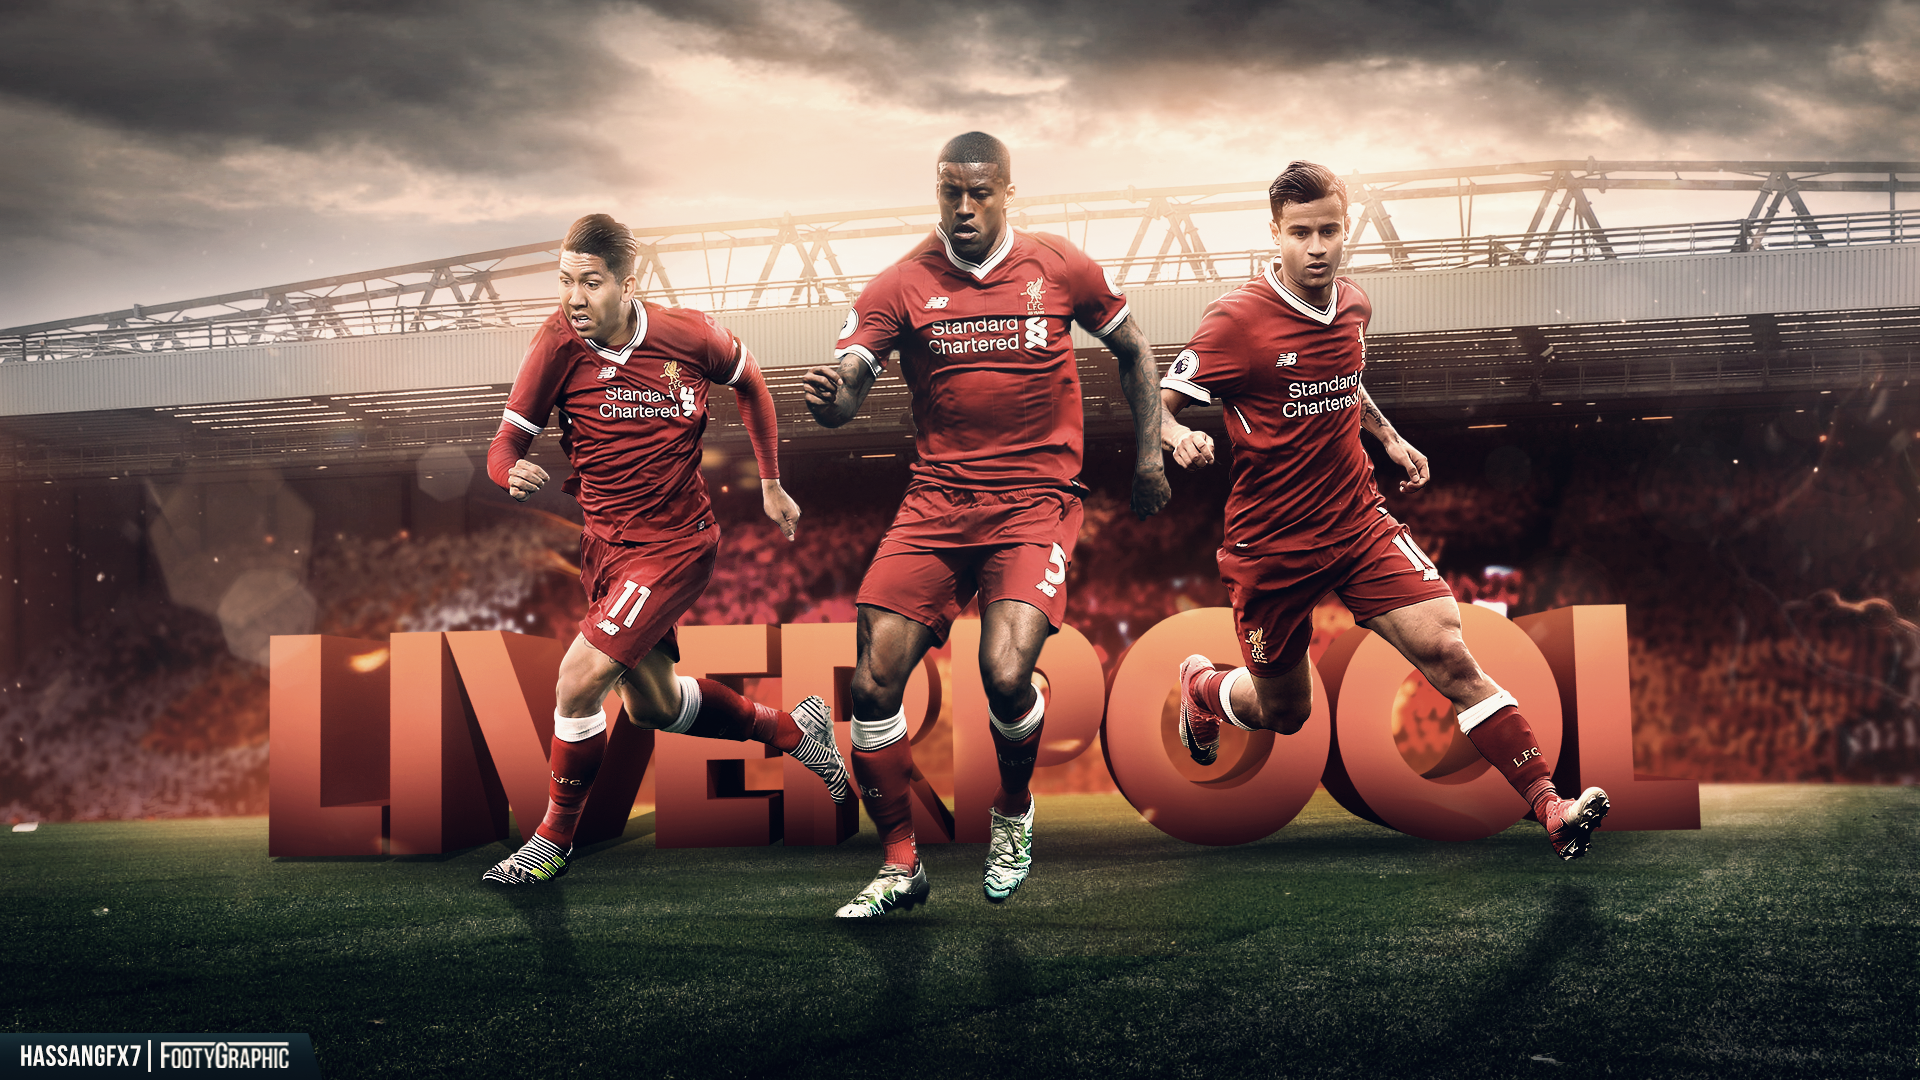 Liverpool Fc Wallpaper Ft Footygraphic By Hassangfx7 On